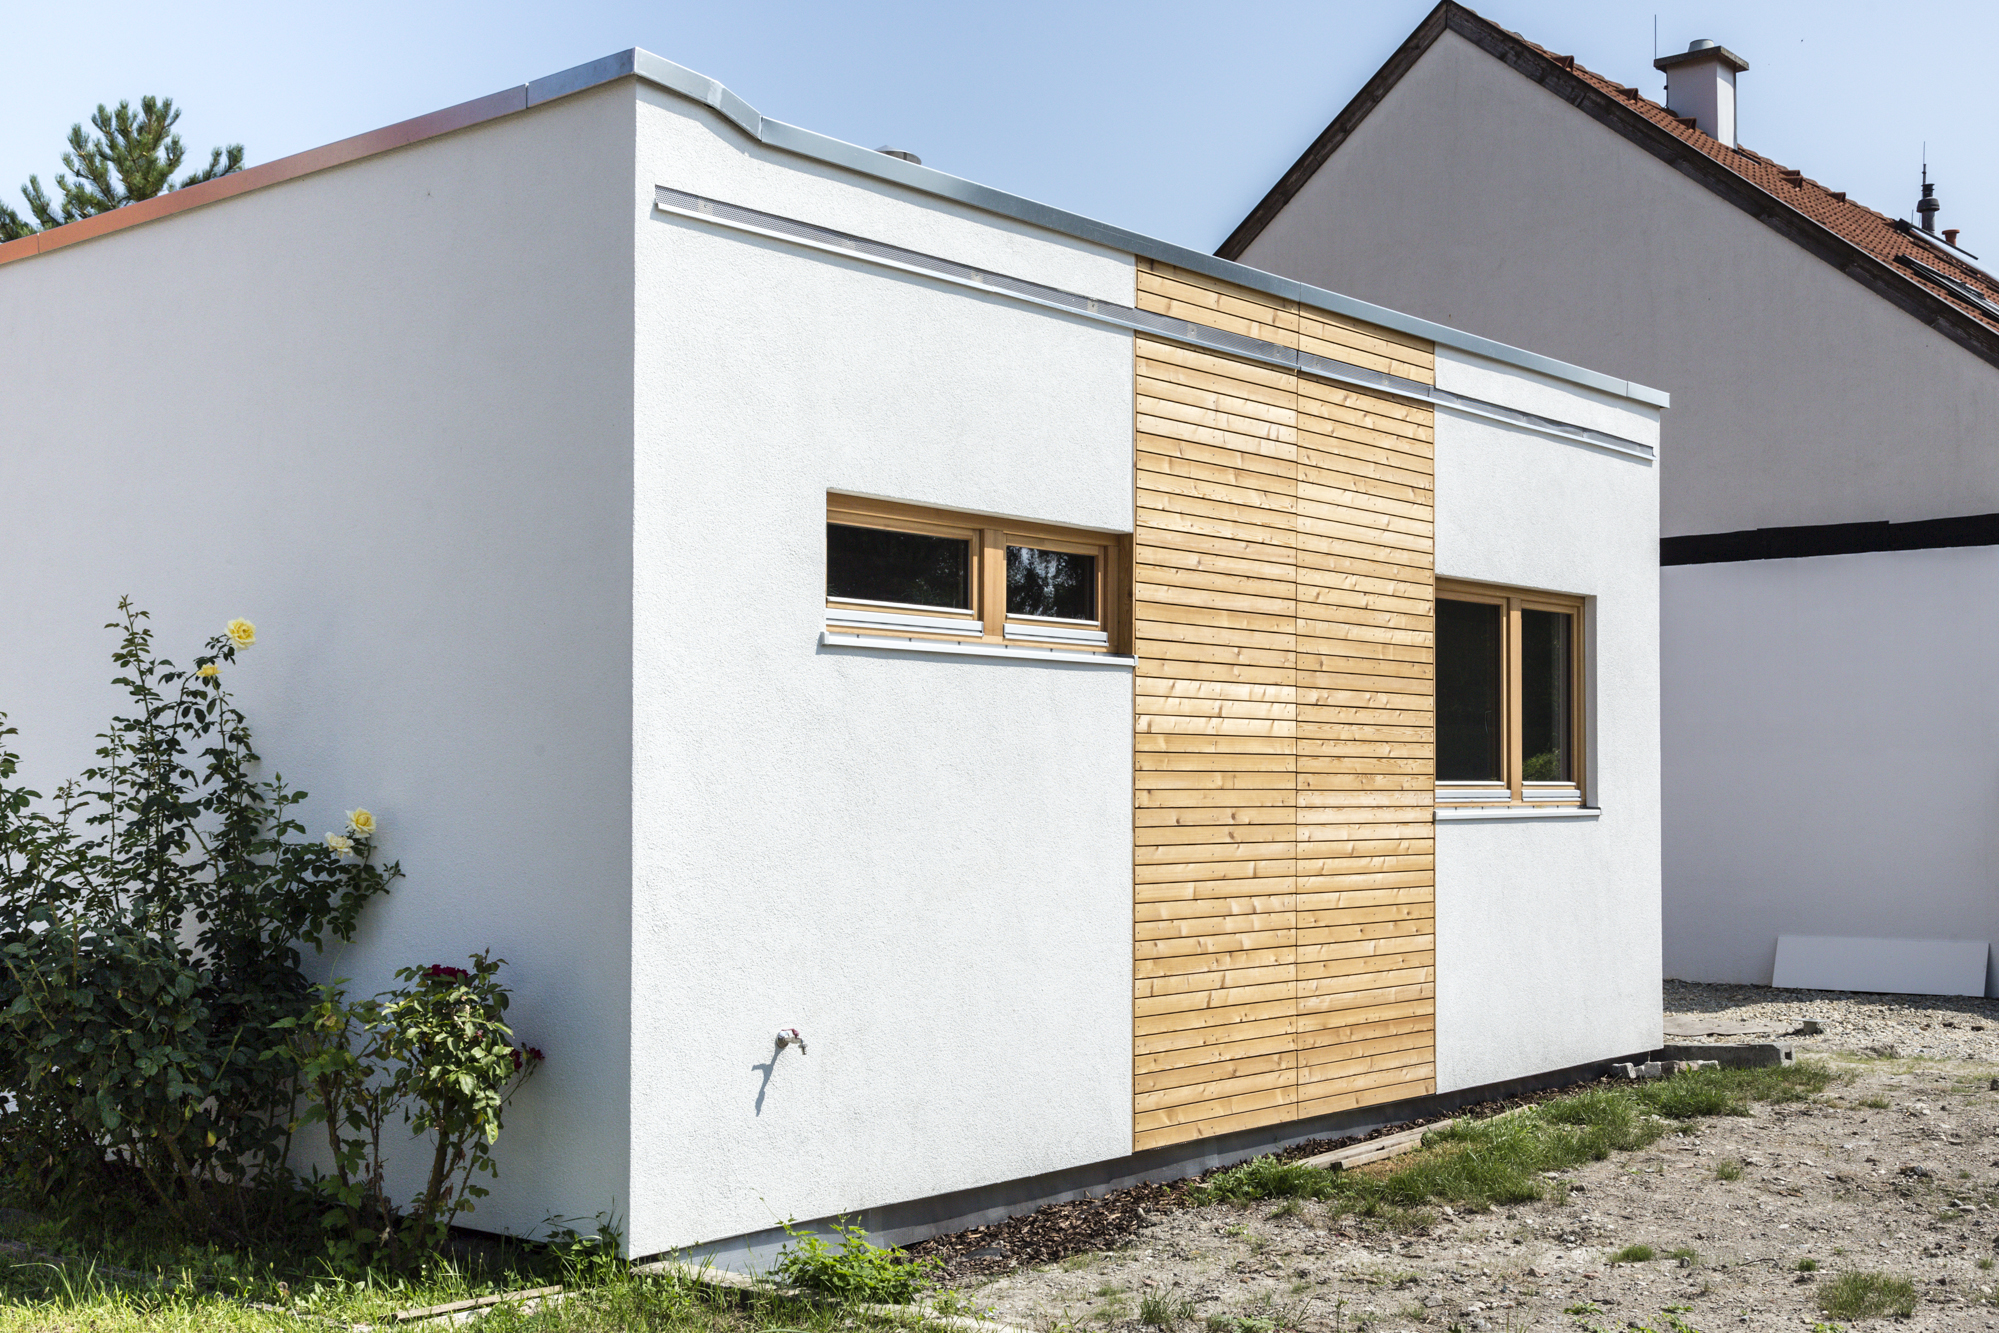 COMMOD „House of the Dog“ 92m² BGF